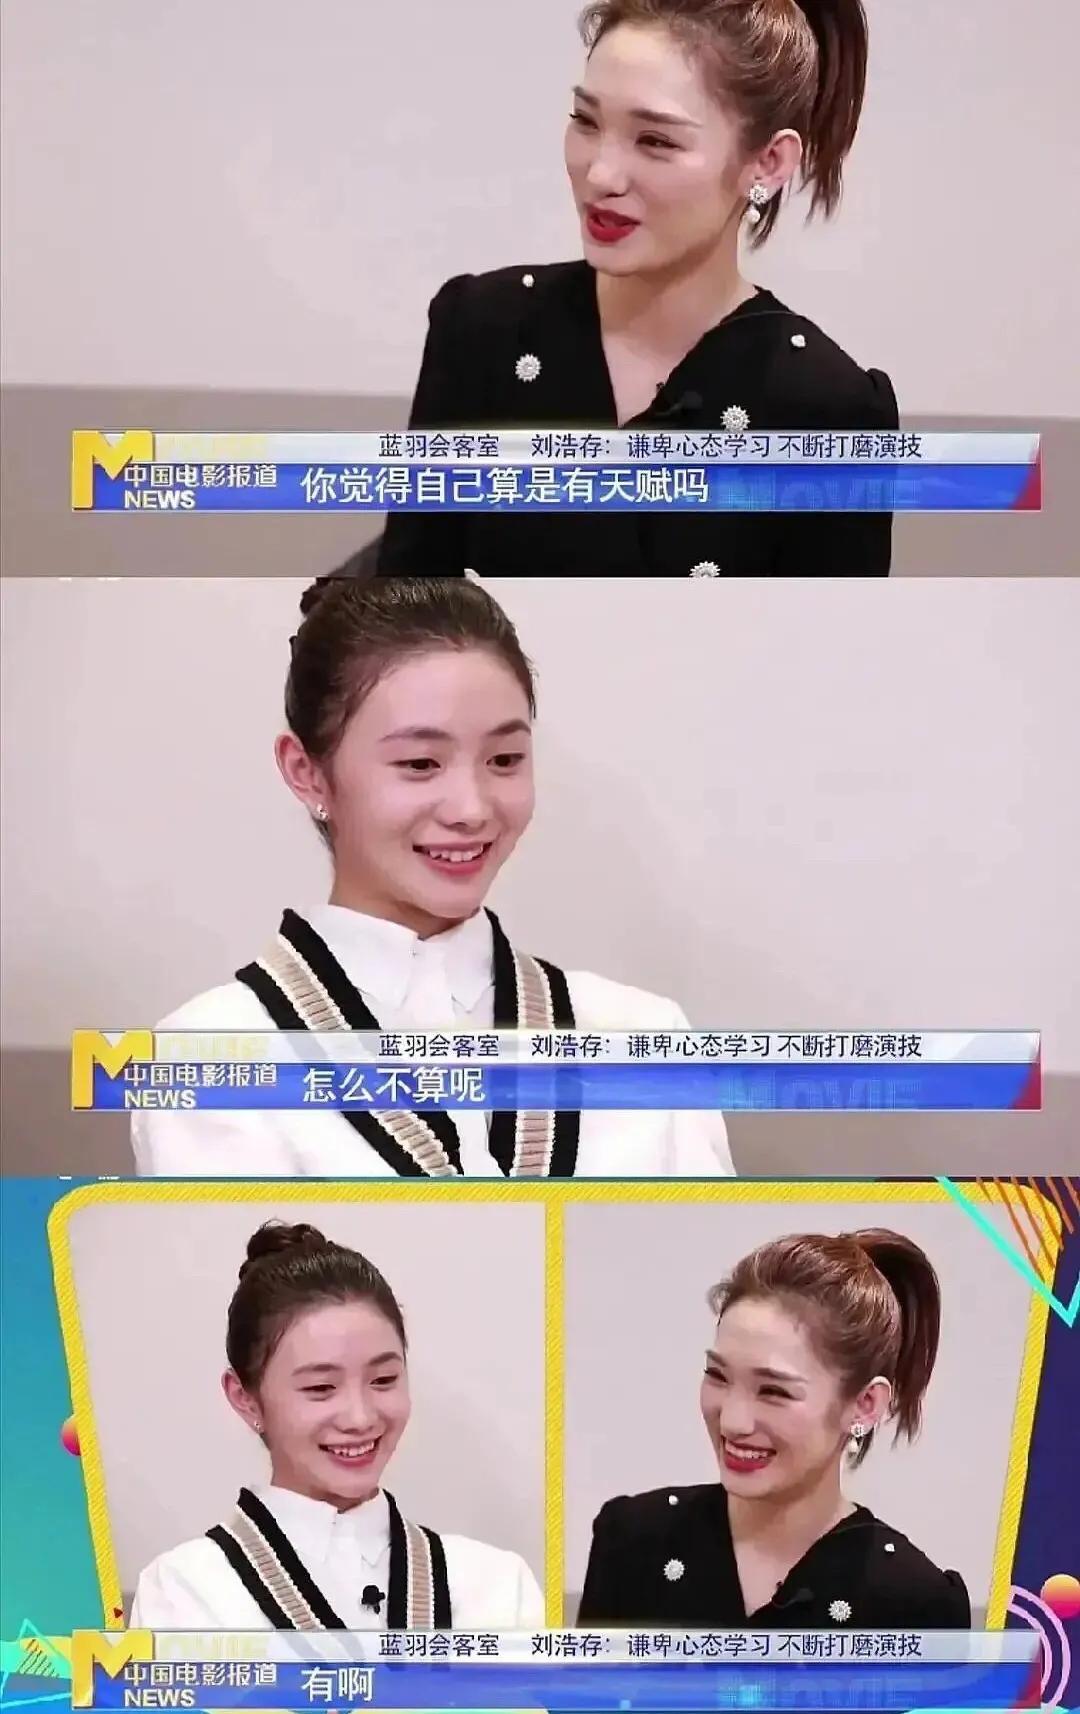 Does Guan Xiaotong rely on Lu Han to draw resource? 